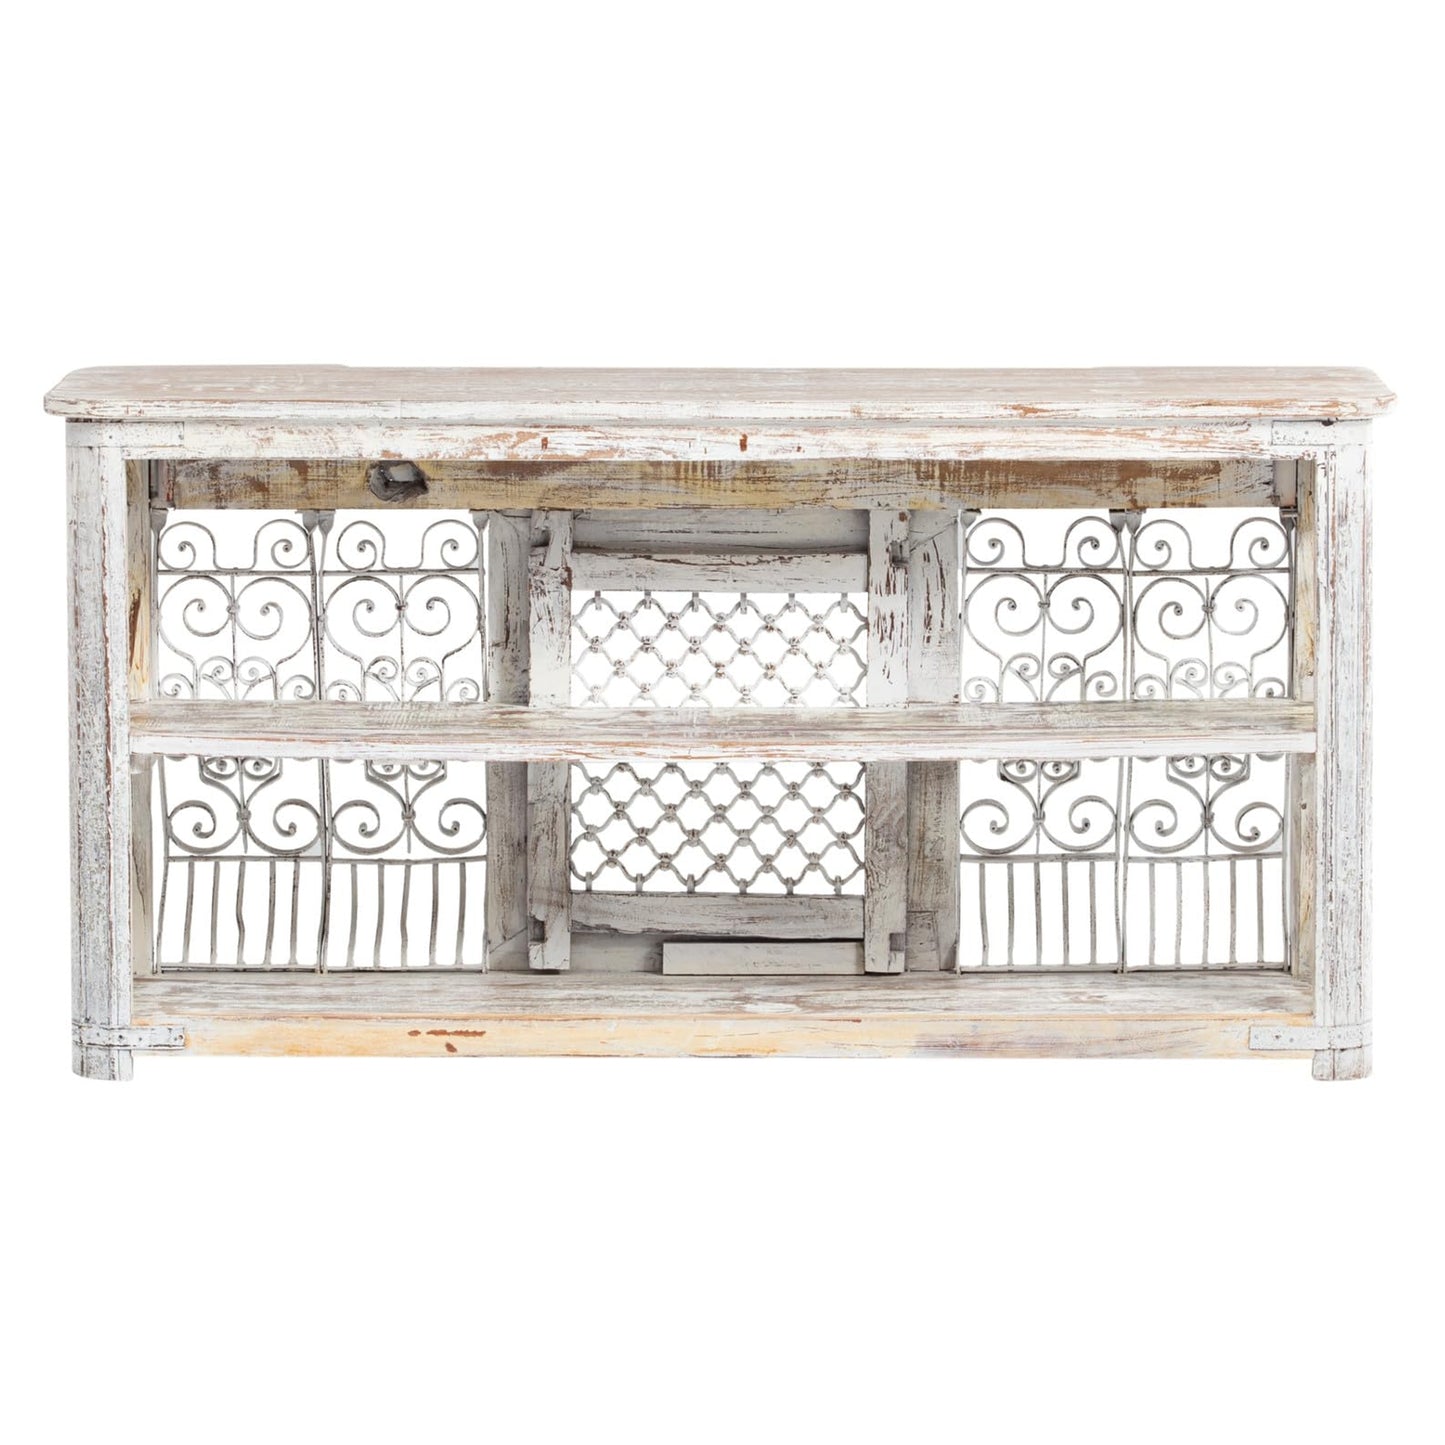 20% OFF Jali Wooden Console, Wrought Iron Panel